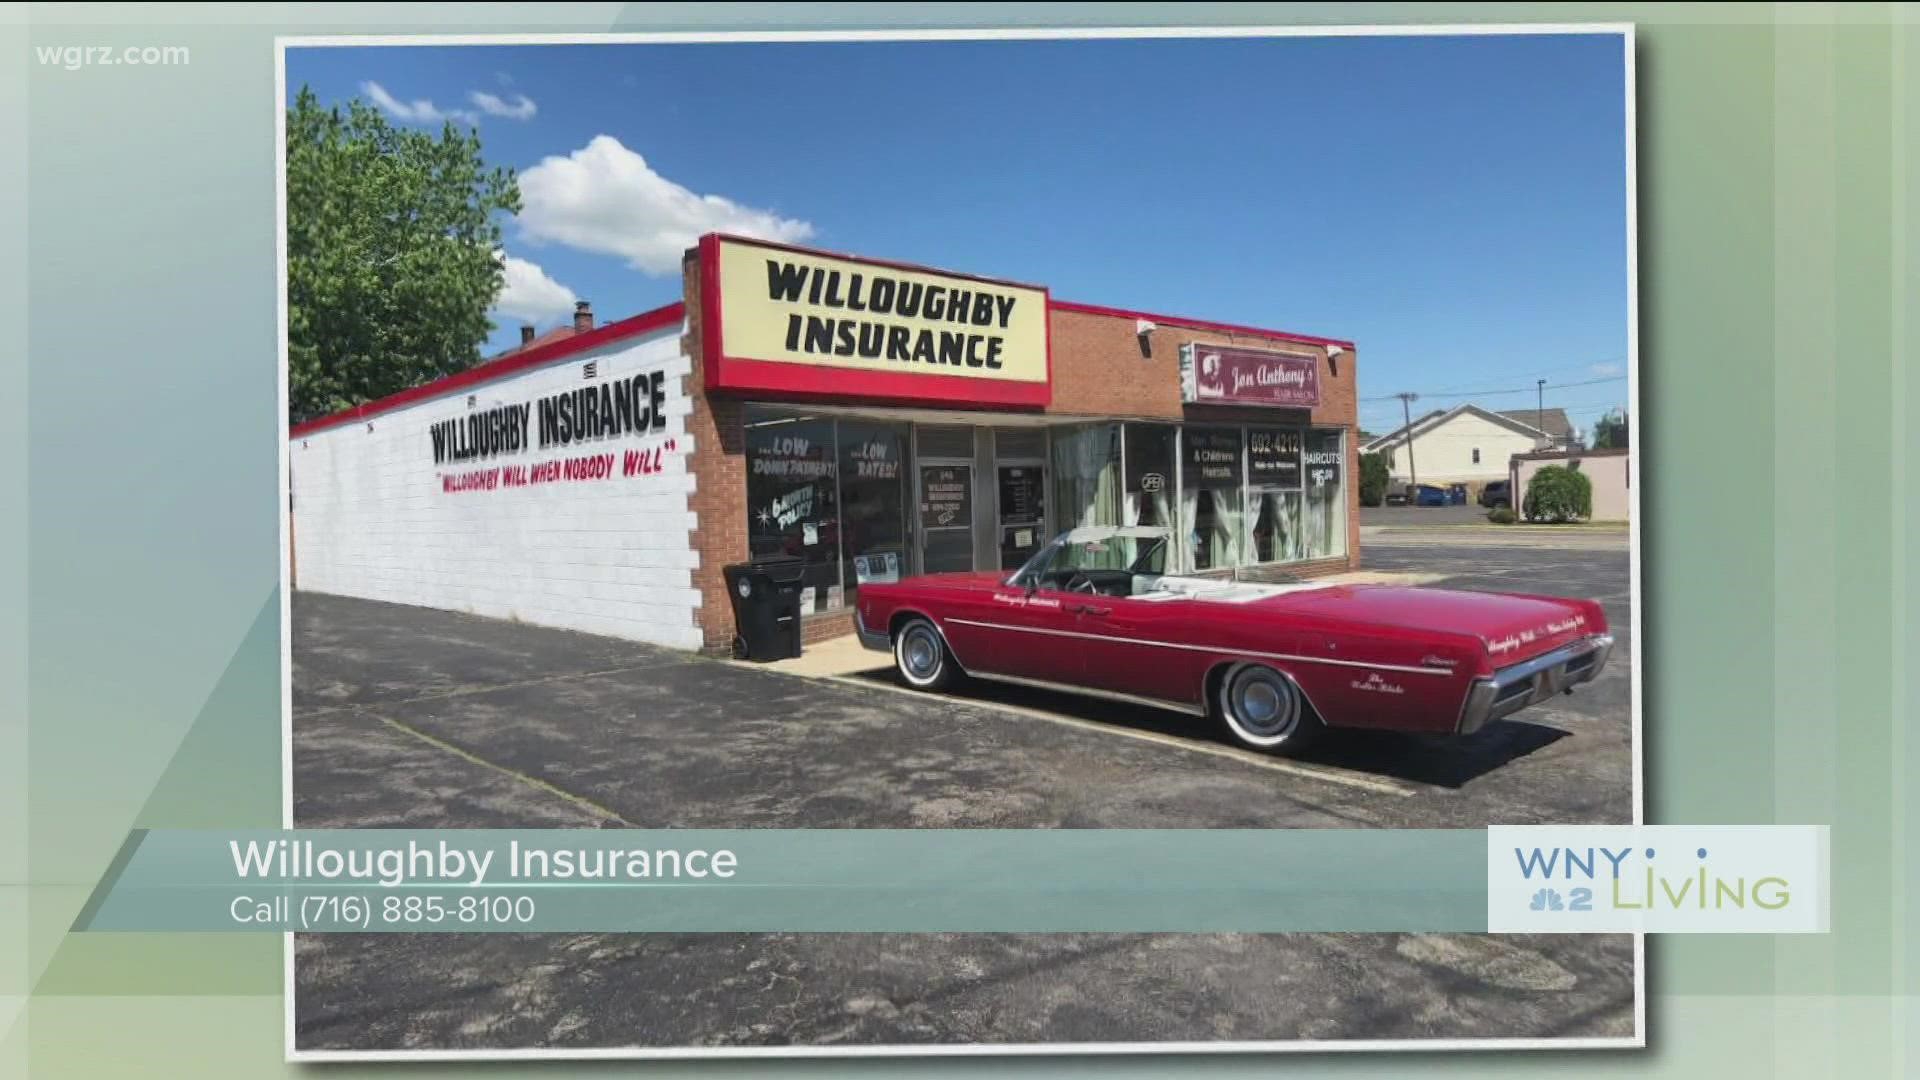 WNY Living - June 25 - Willoughby Insurance (THIS VIDEO IS SPONSORED BY WILLOUGHBY INSURANCE)